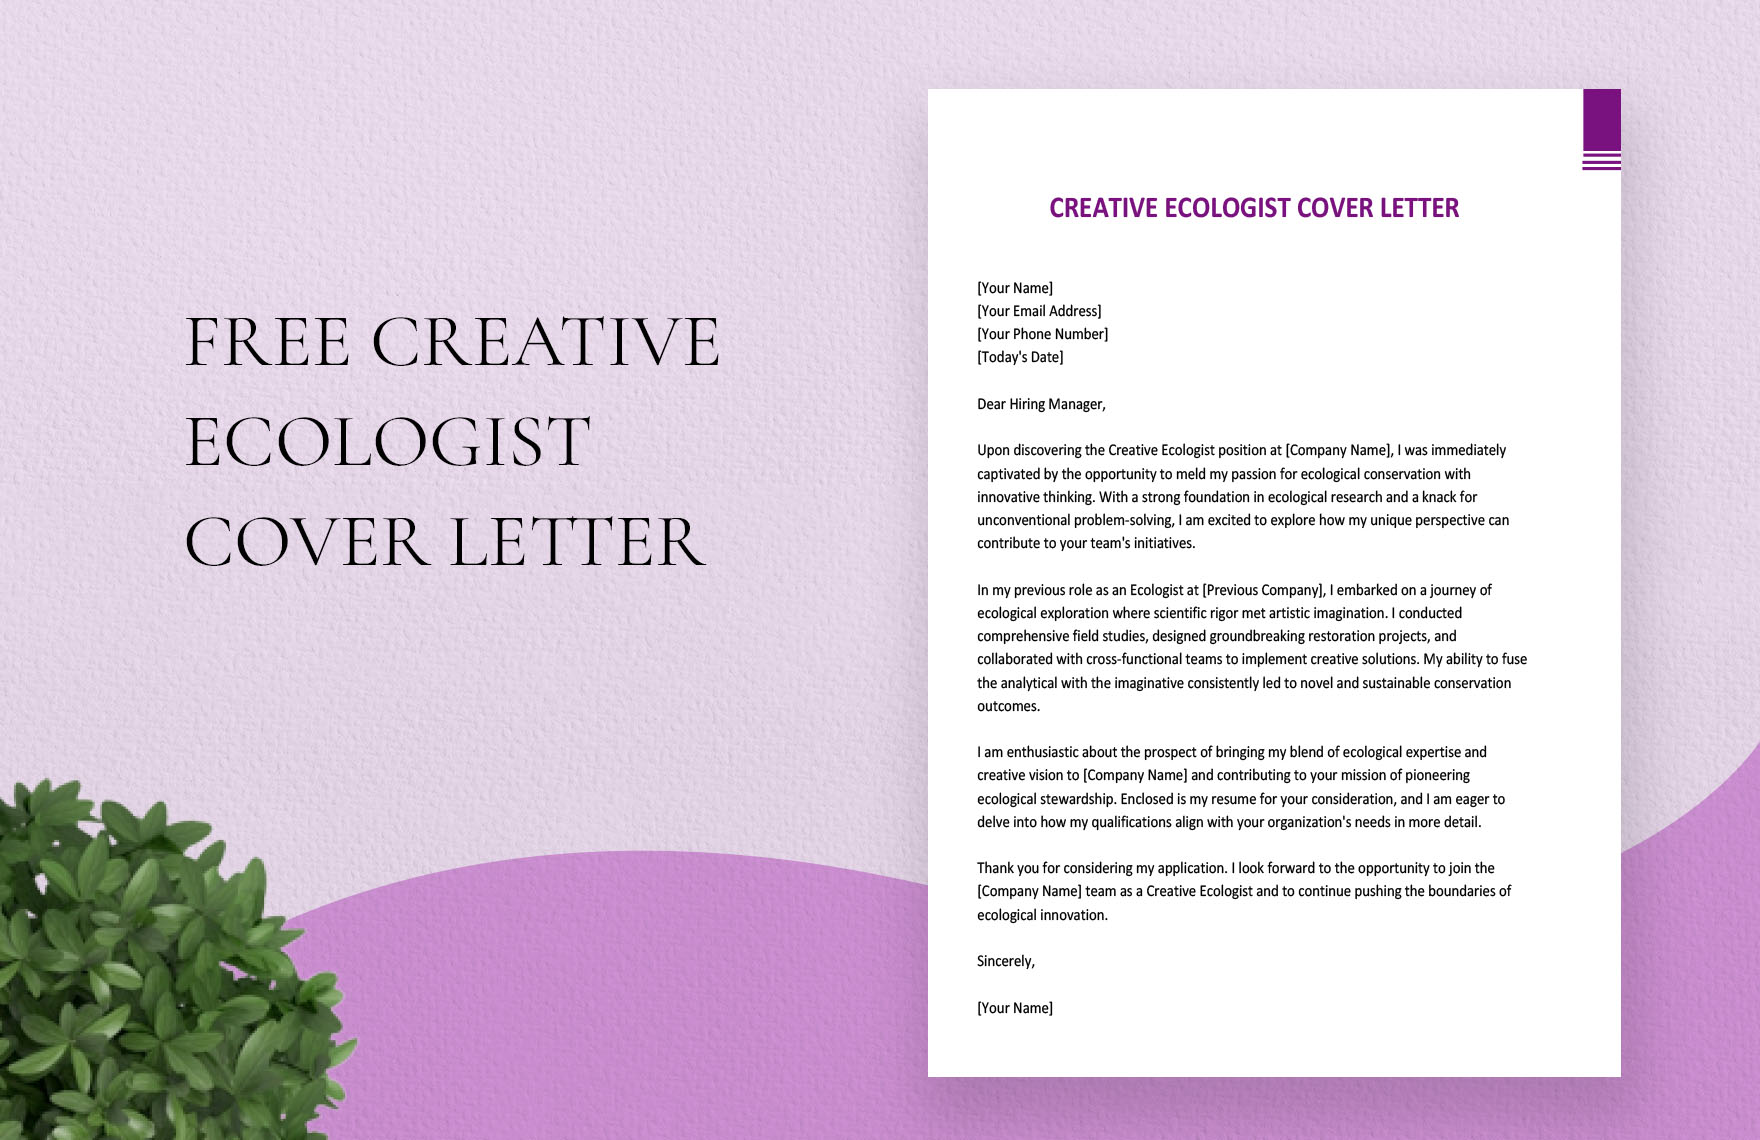 Creative Ecologist Cover Letter